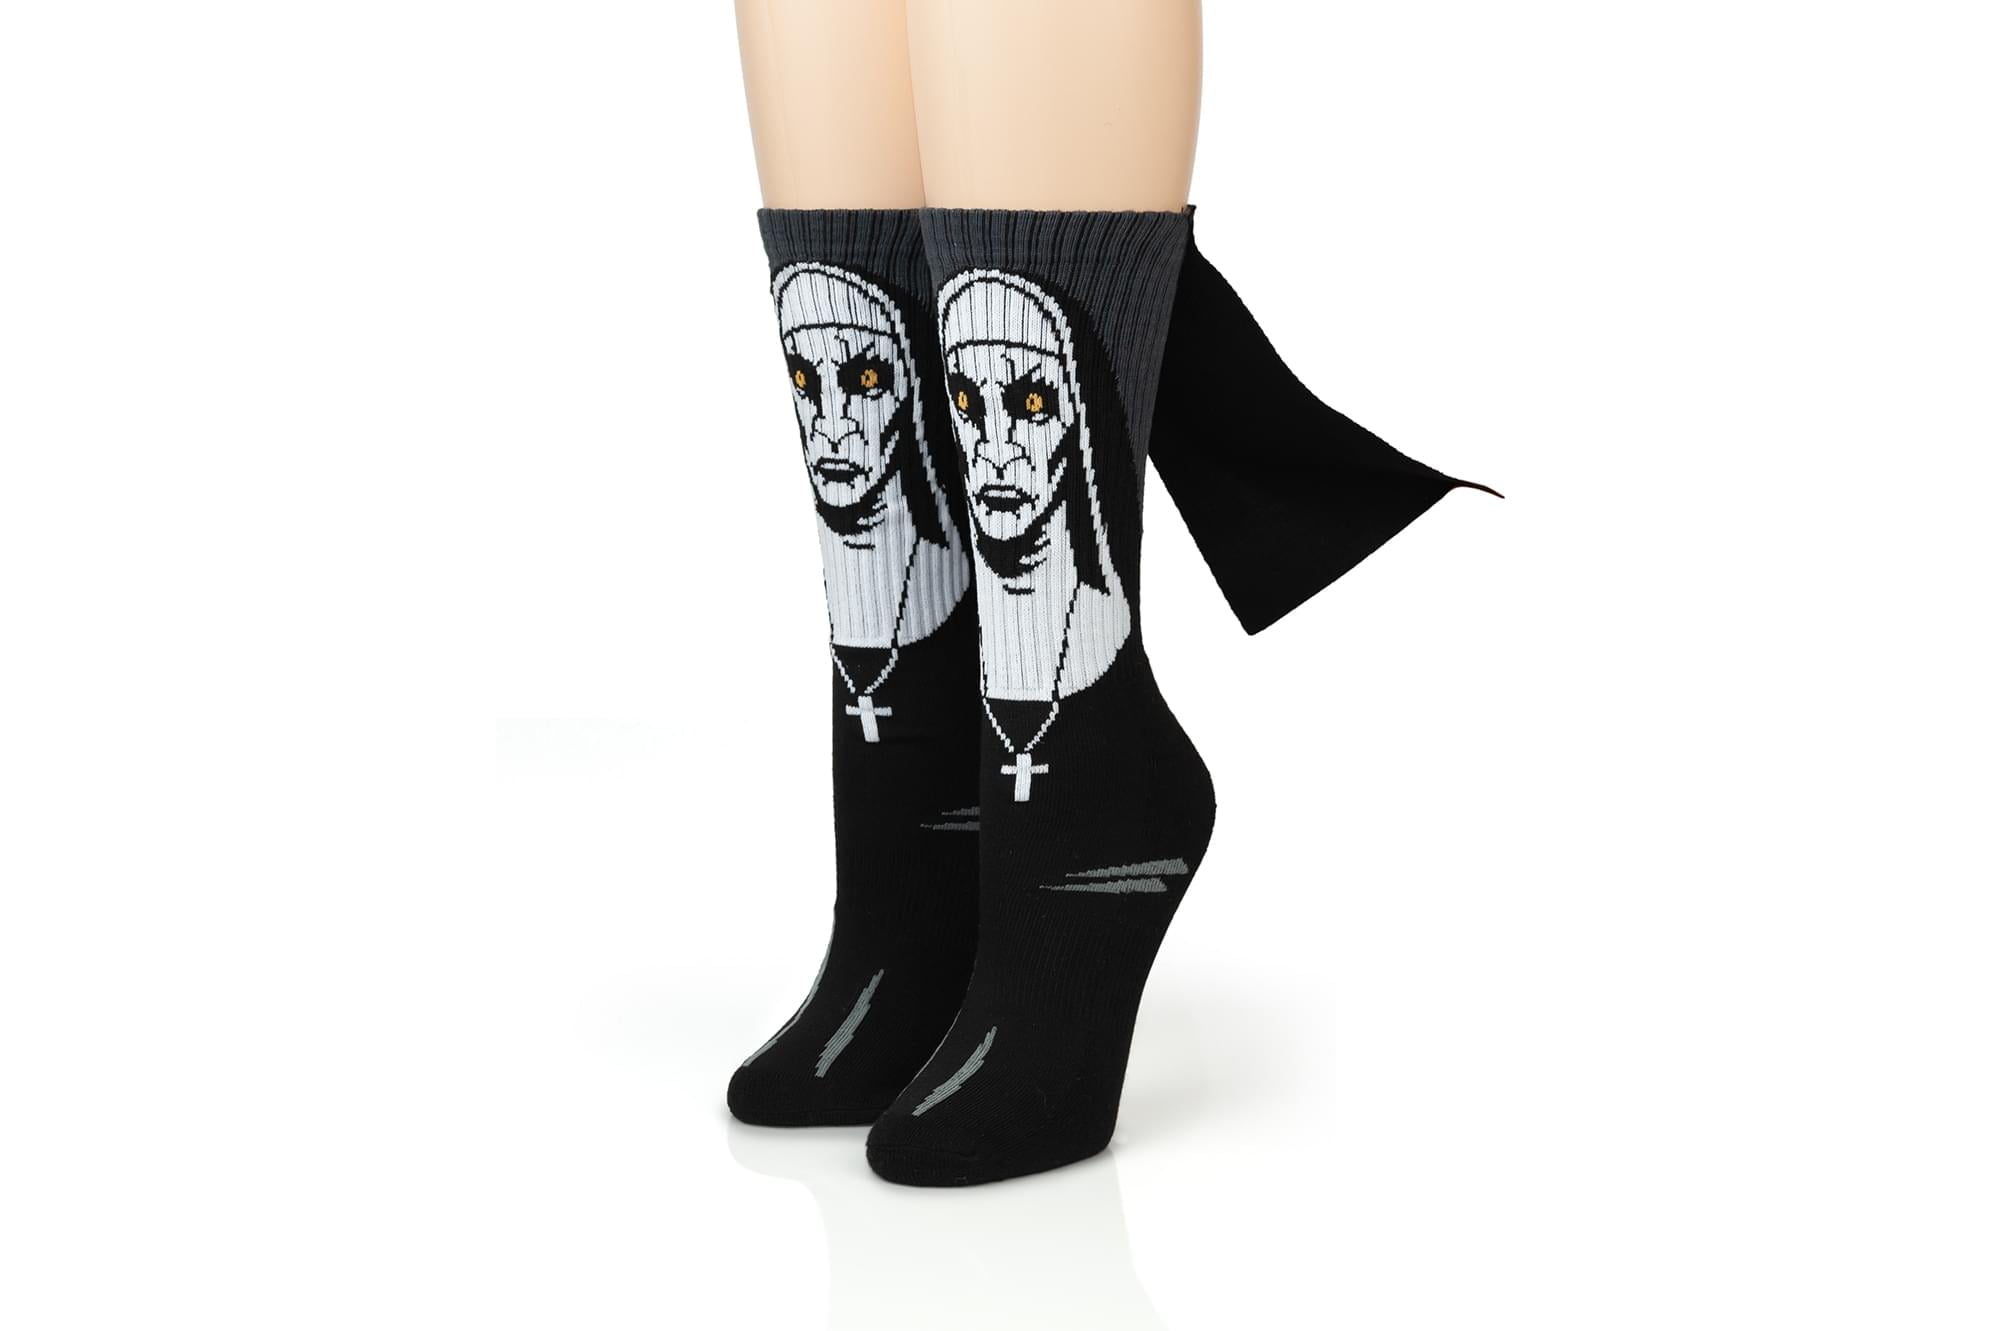 Unisexe Gumball caniche Crew Chaussettes-Dollar $ 